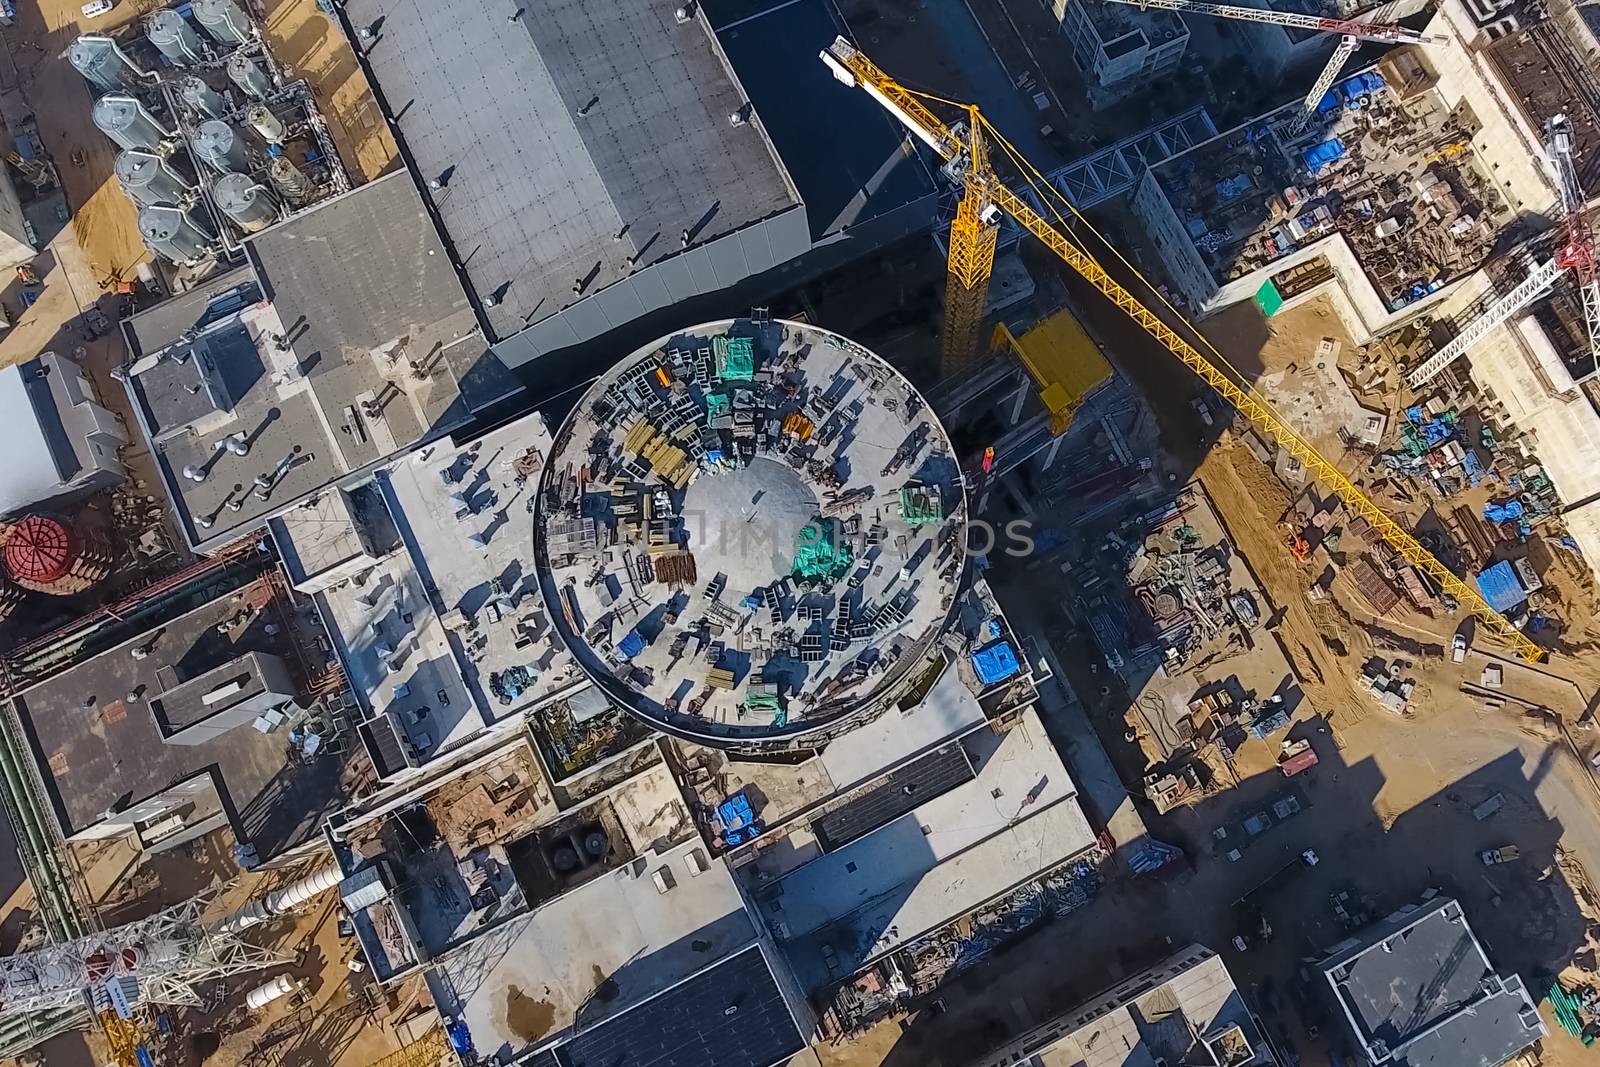 Aerial survey of a nuclear power plant under construction. Insta by nyrok